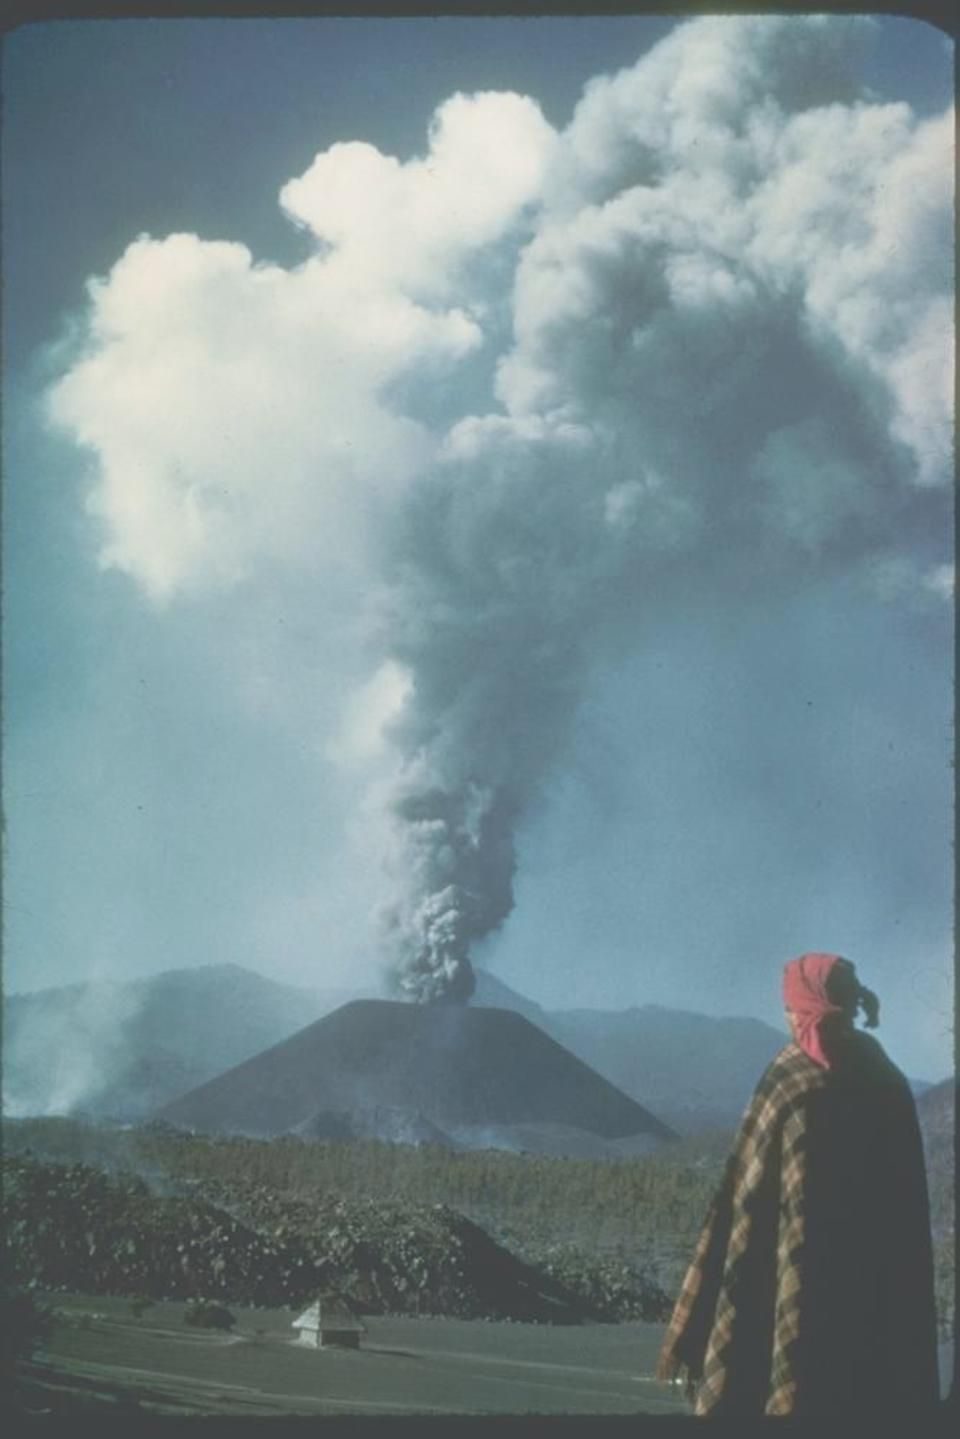 The volcano of Parícutin soon after its birth in 1943. Photo by K. Segerstrom